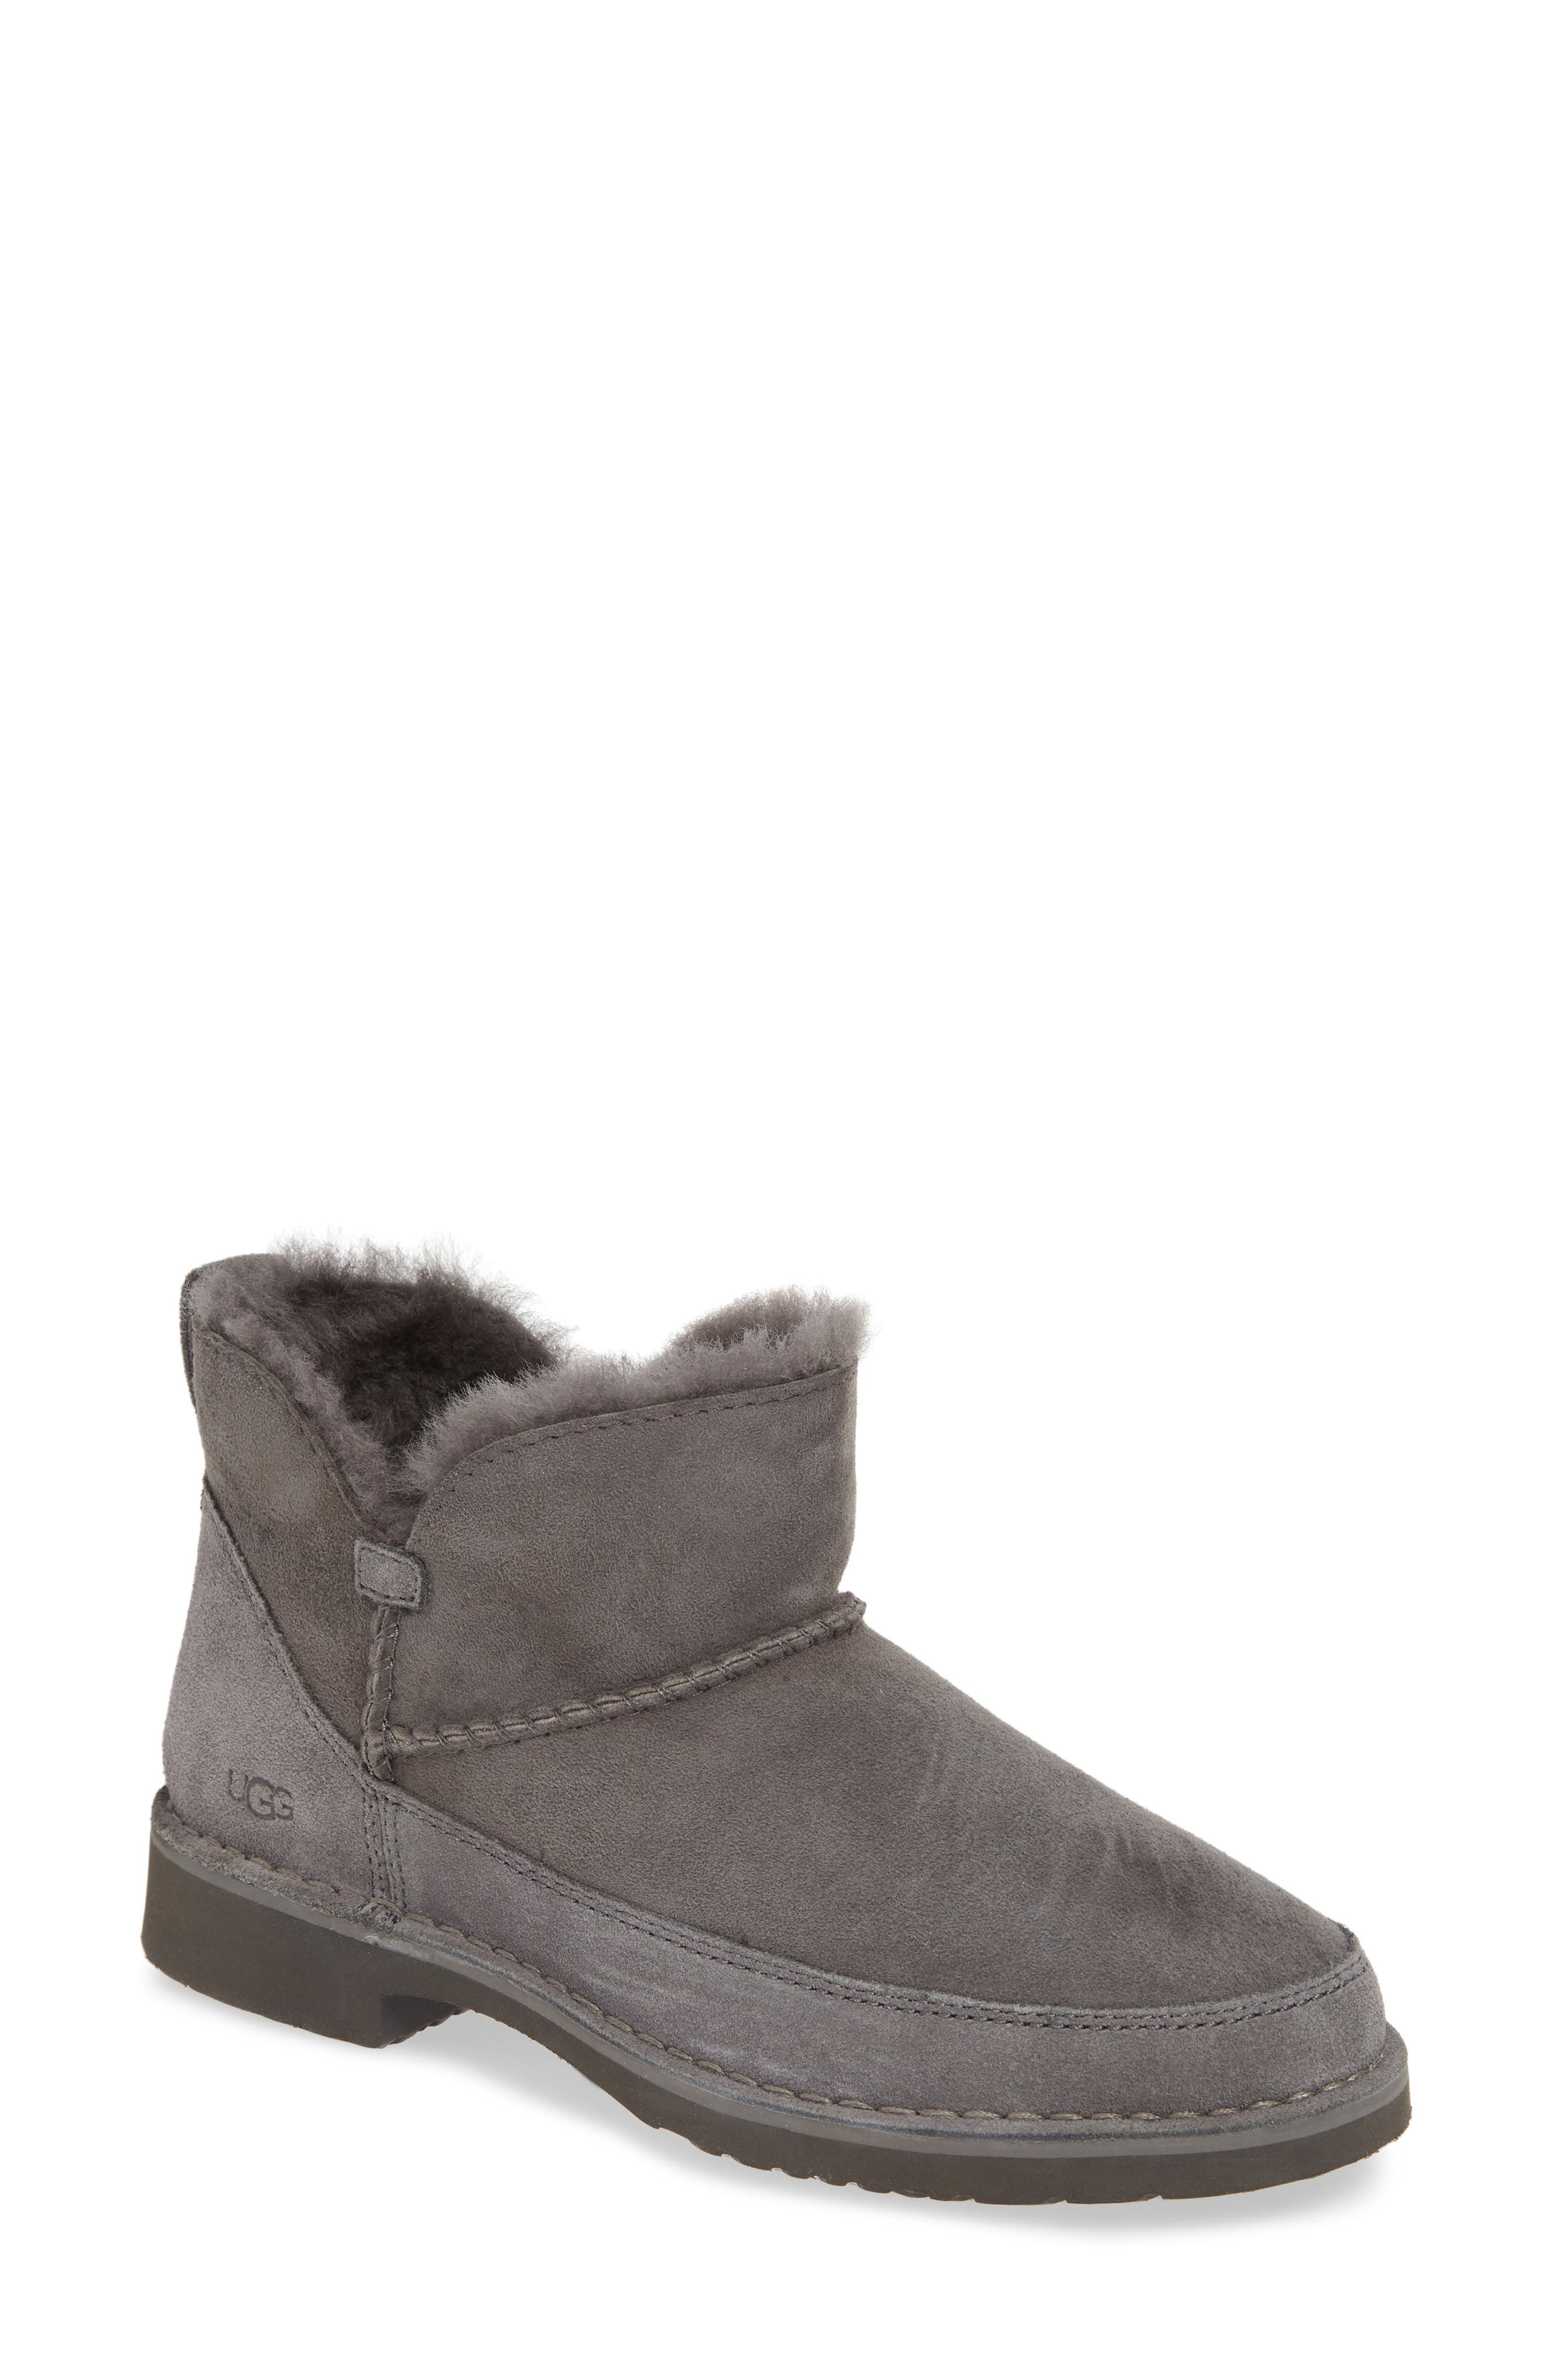 uggs shoes nordstrom